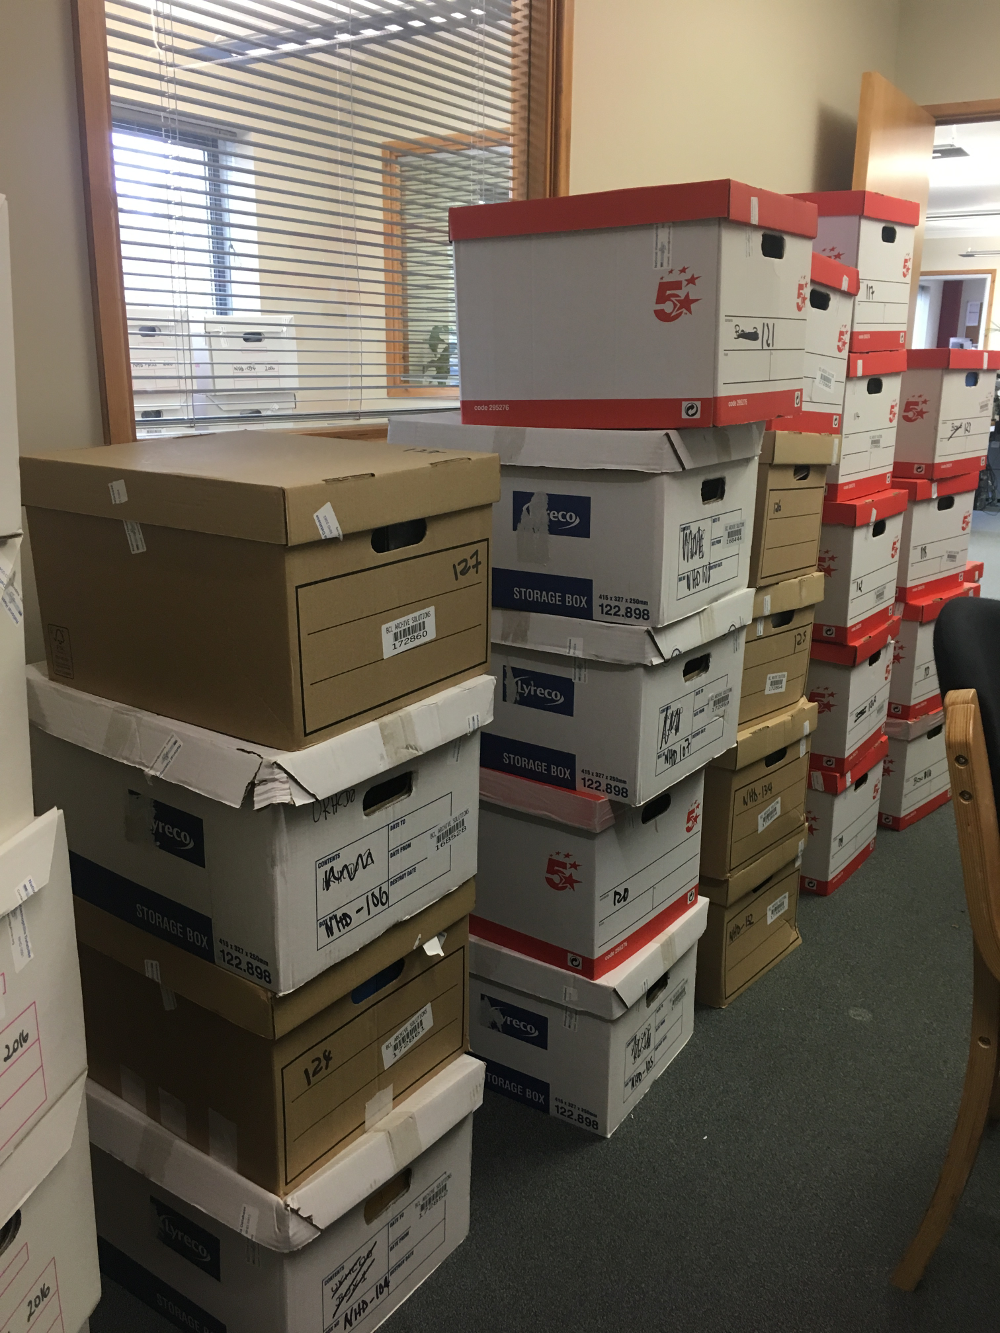 Boxes of files